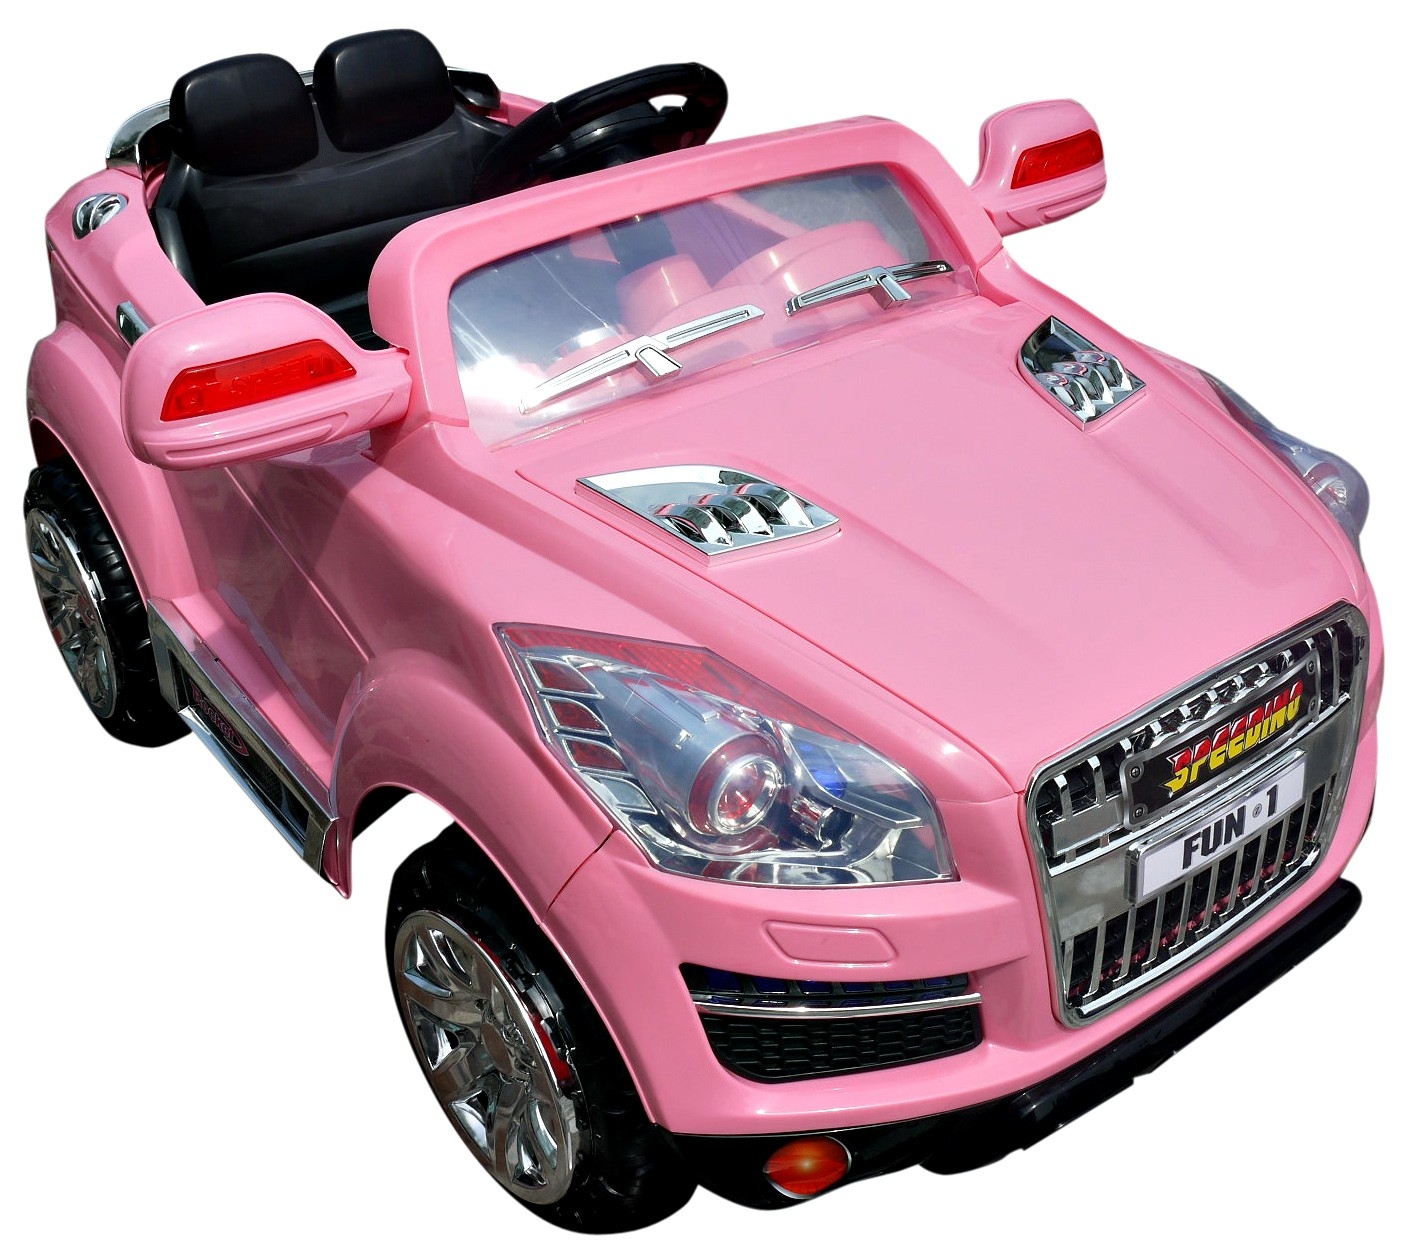 Girls Pink Crossover Jeep 12v Q7 Style SUV Ride-On